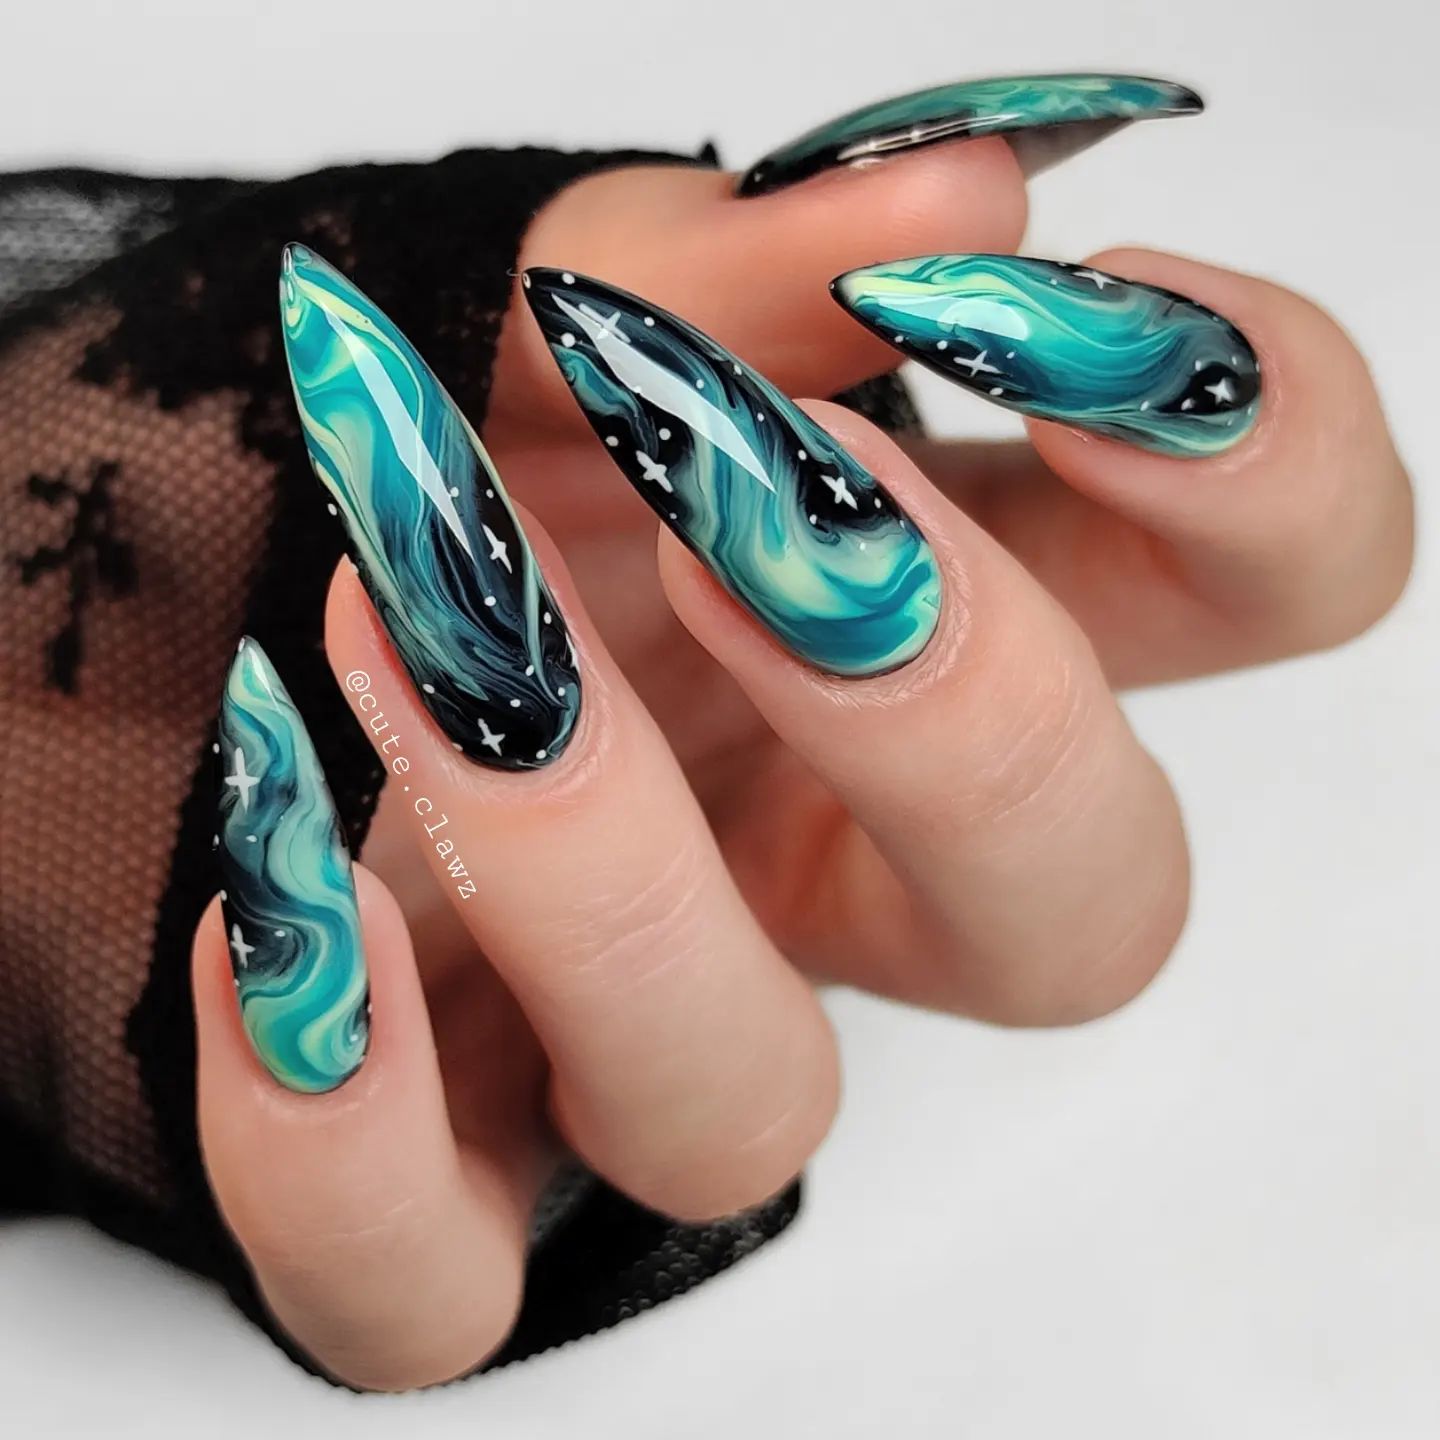 Black and green marbled galaxy nail art in glossy finish on long stiletto shaped acrylic nails